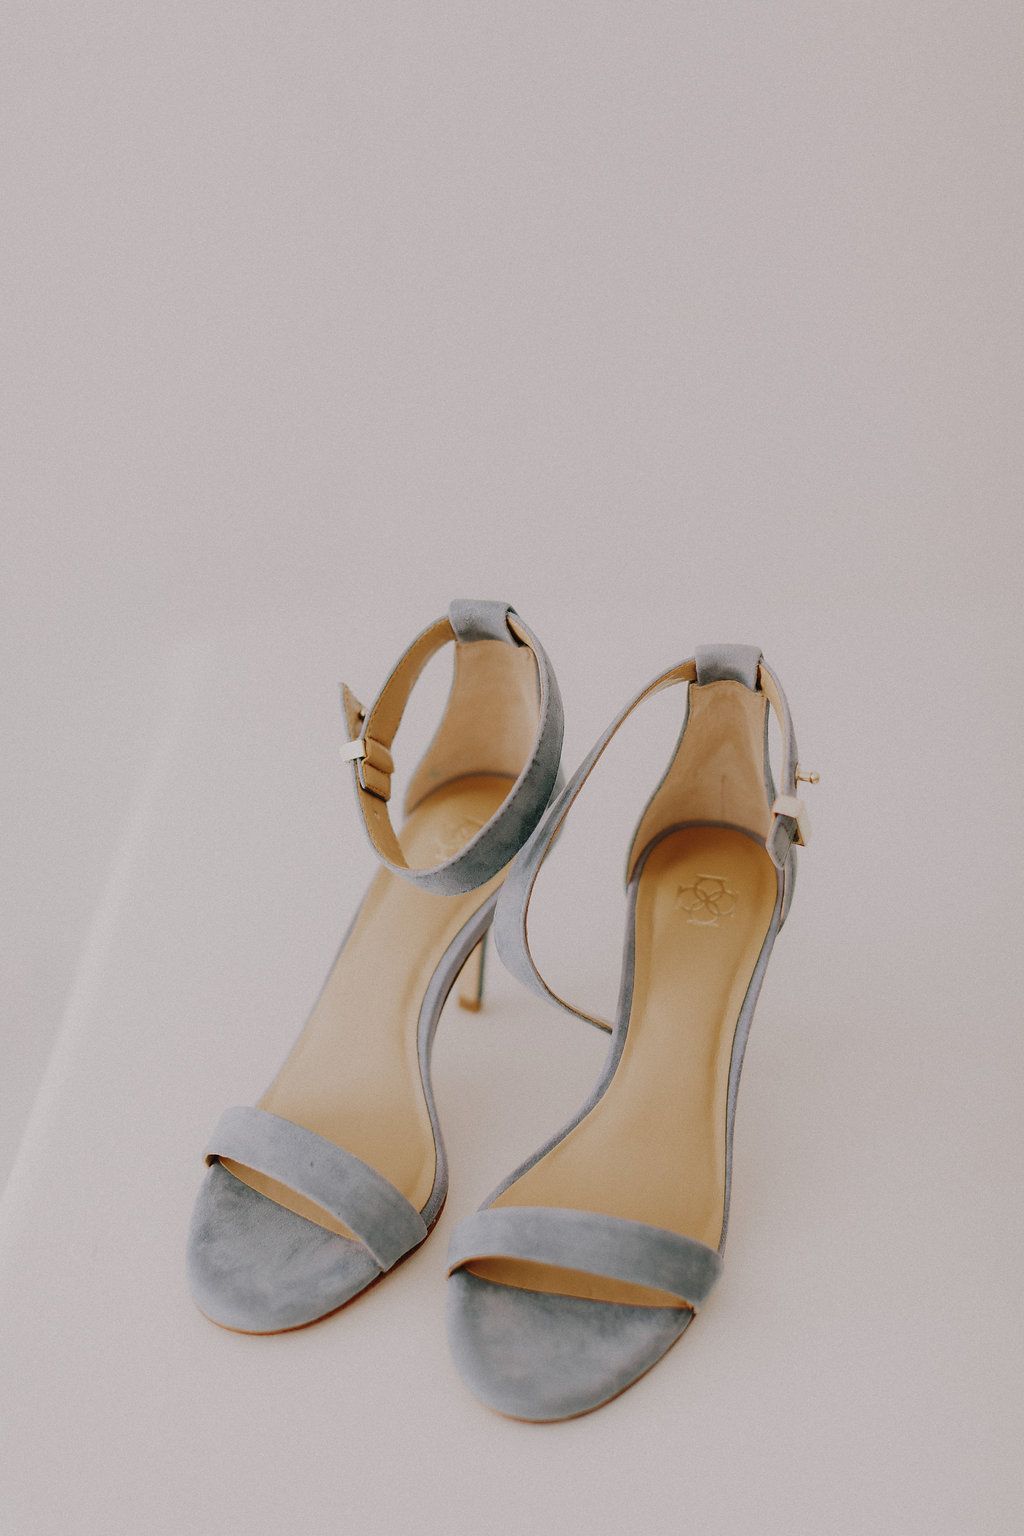 3-classic-blue-suede-wedding-shoes